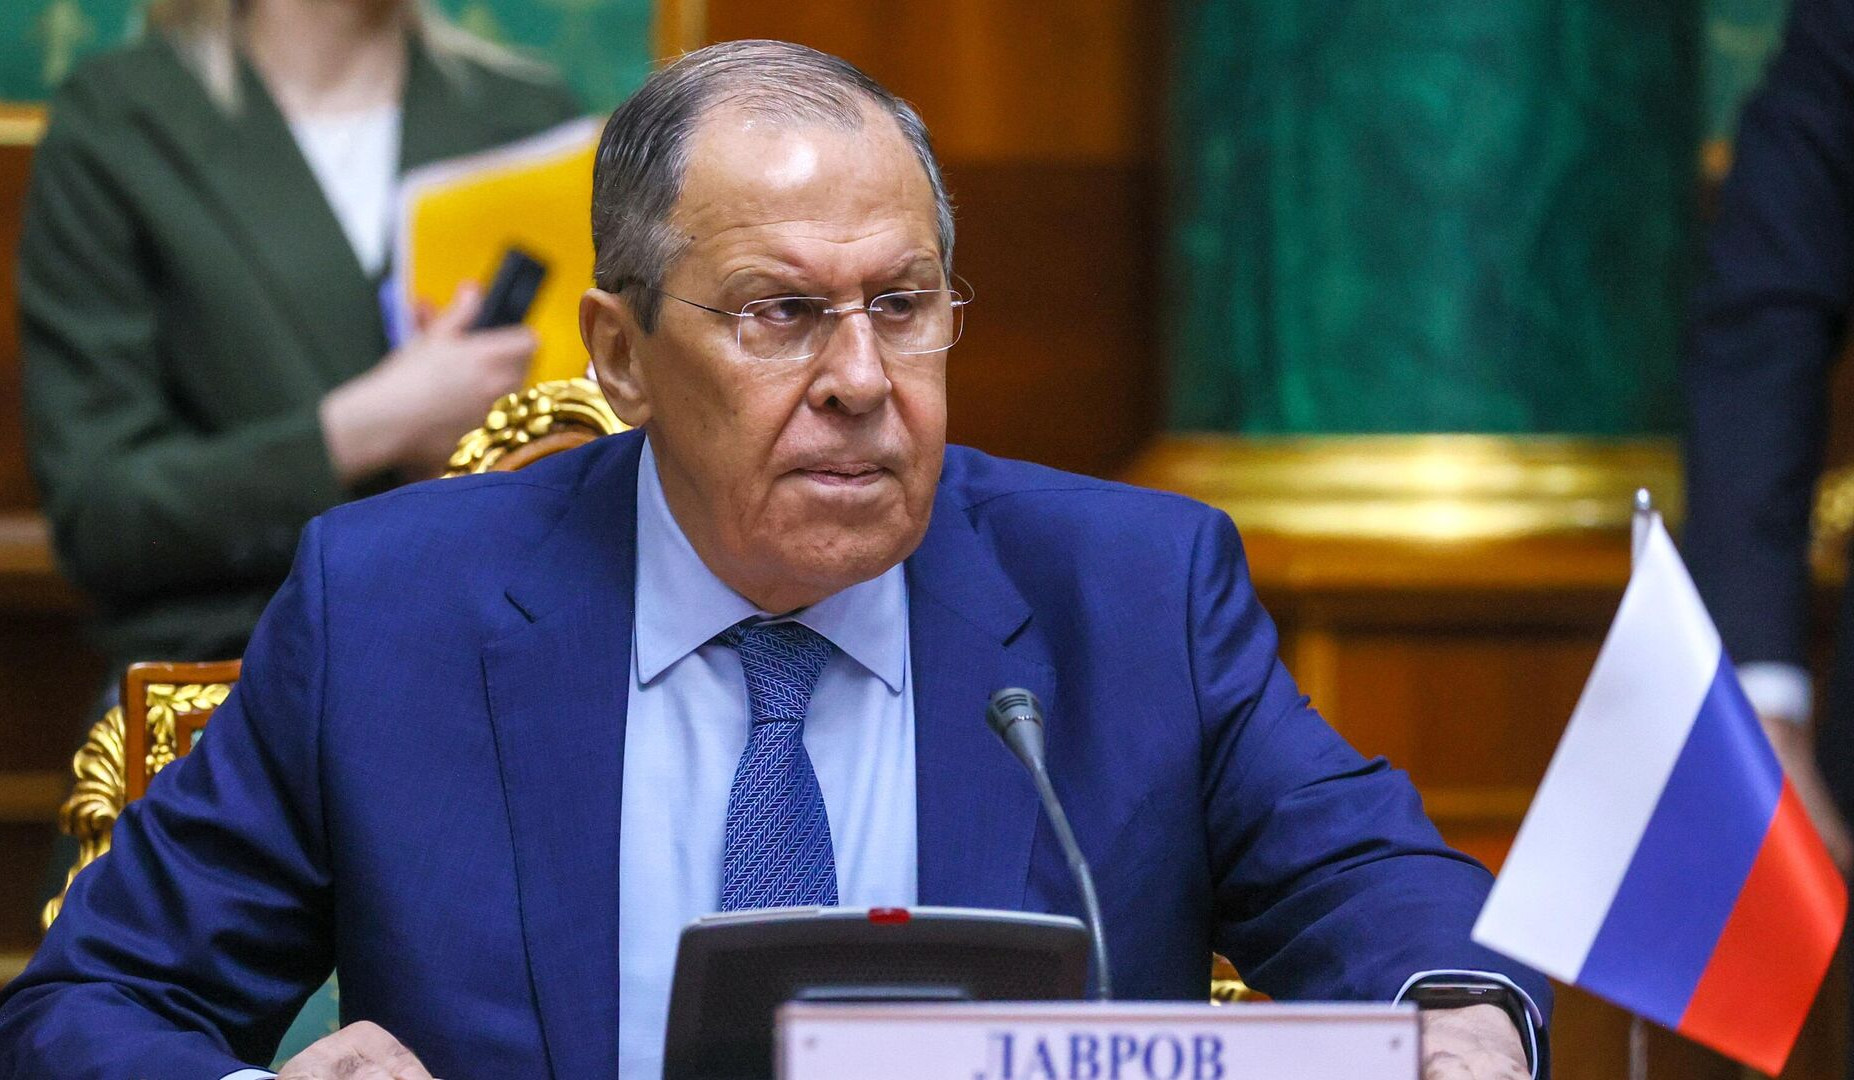 Each of parties can make proposals regarding Russian peacekeeping mission: Lavrov